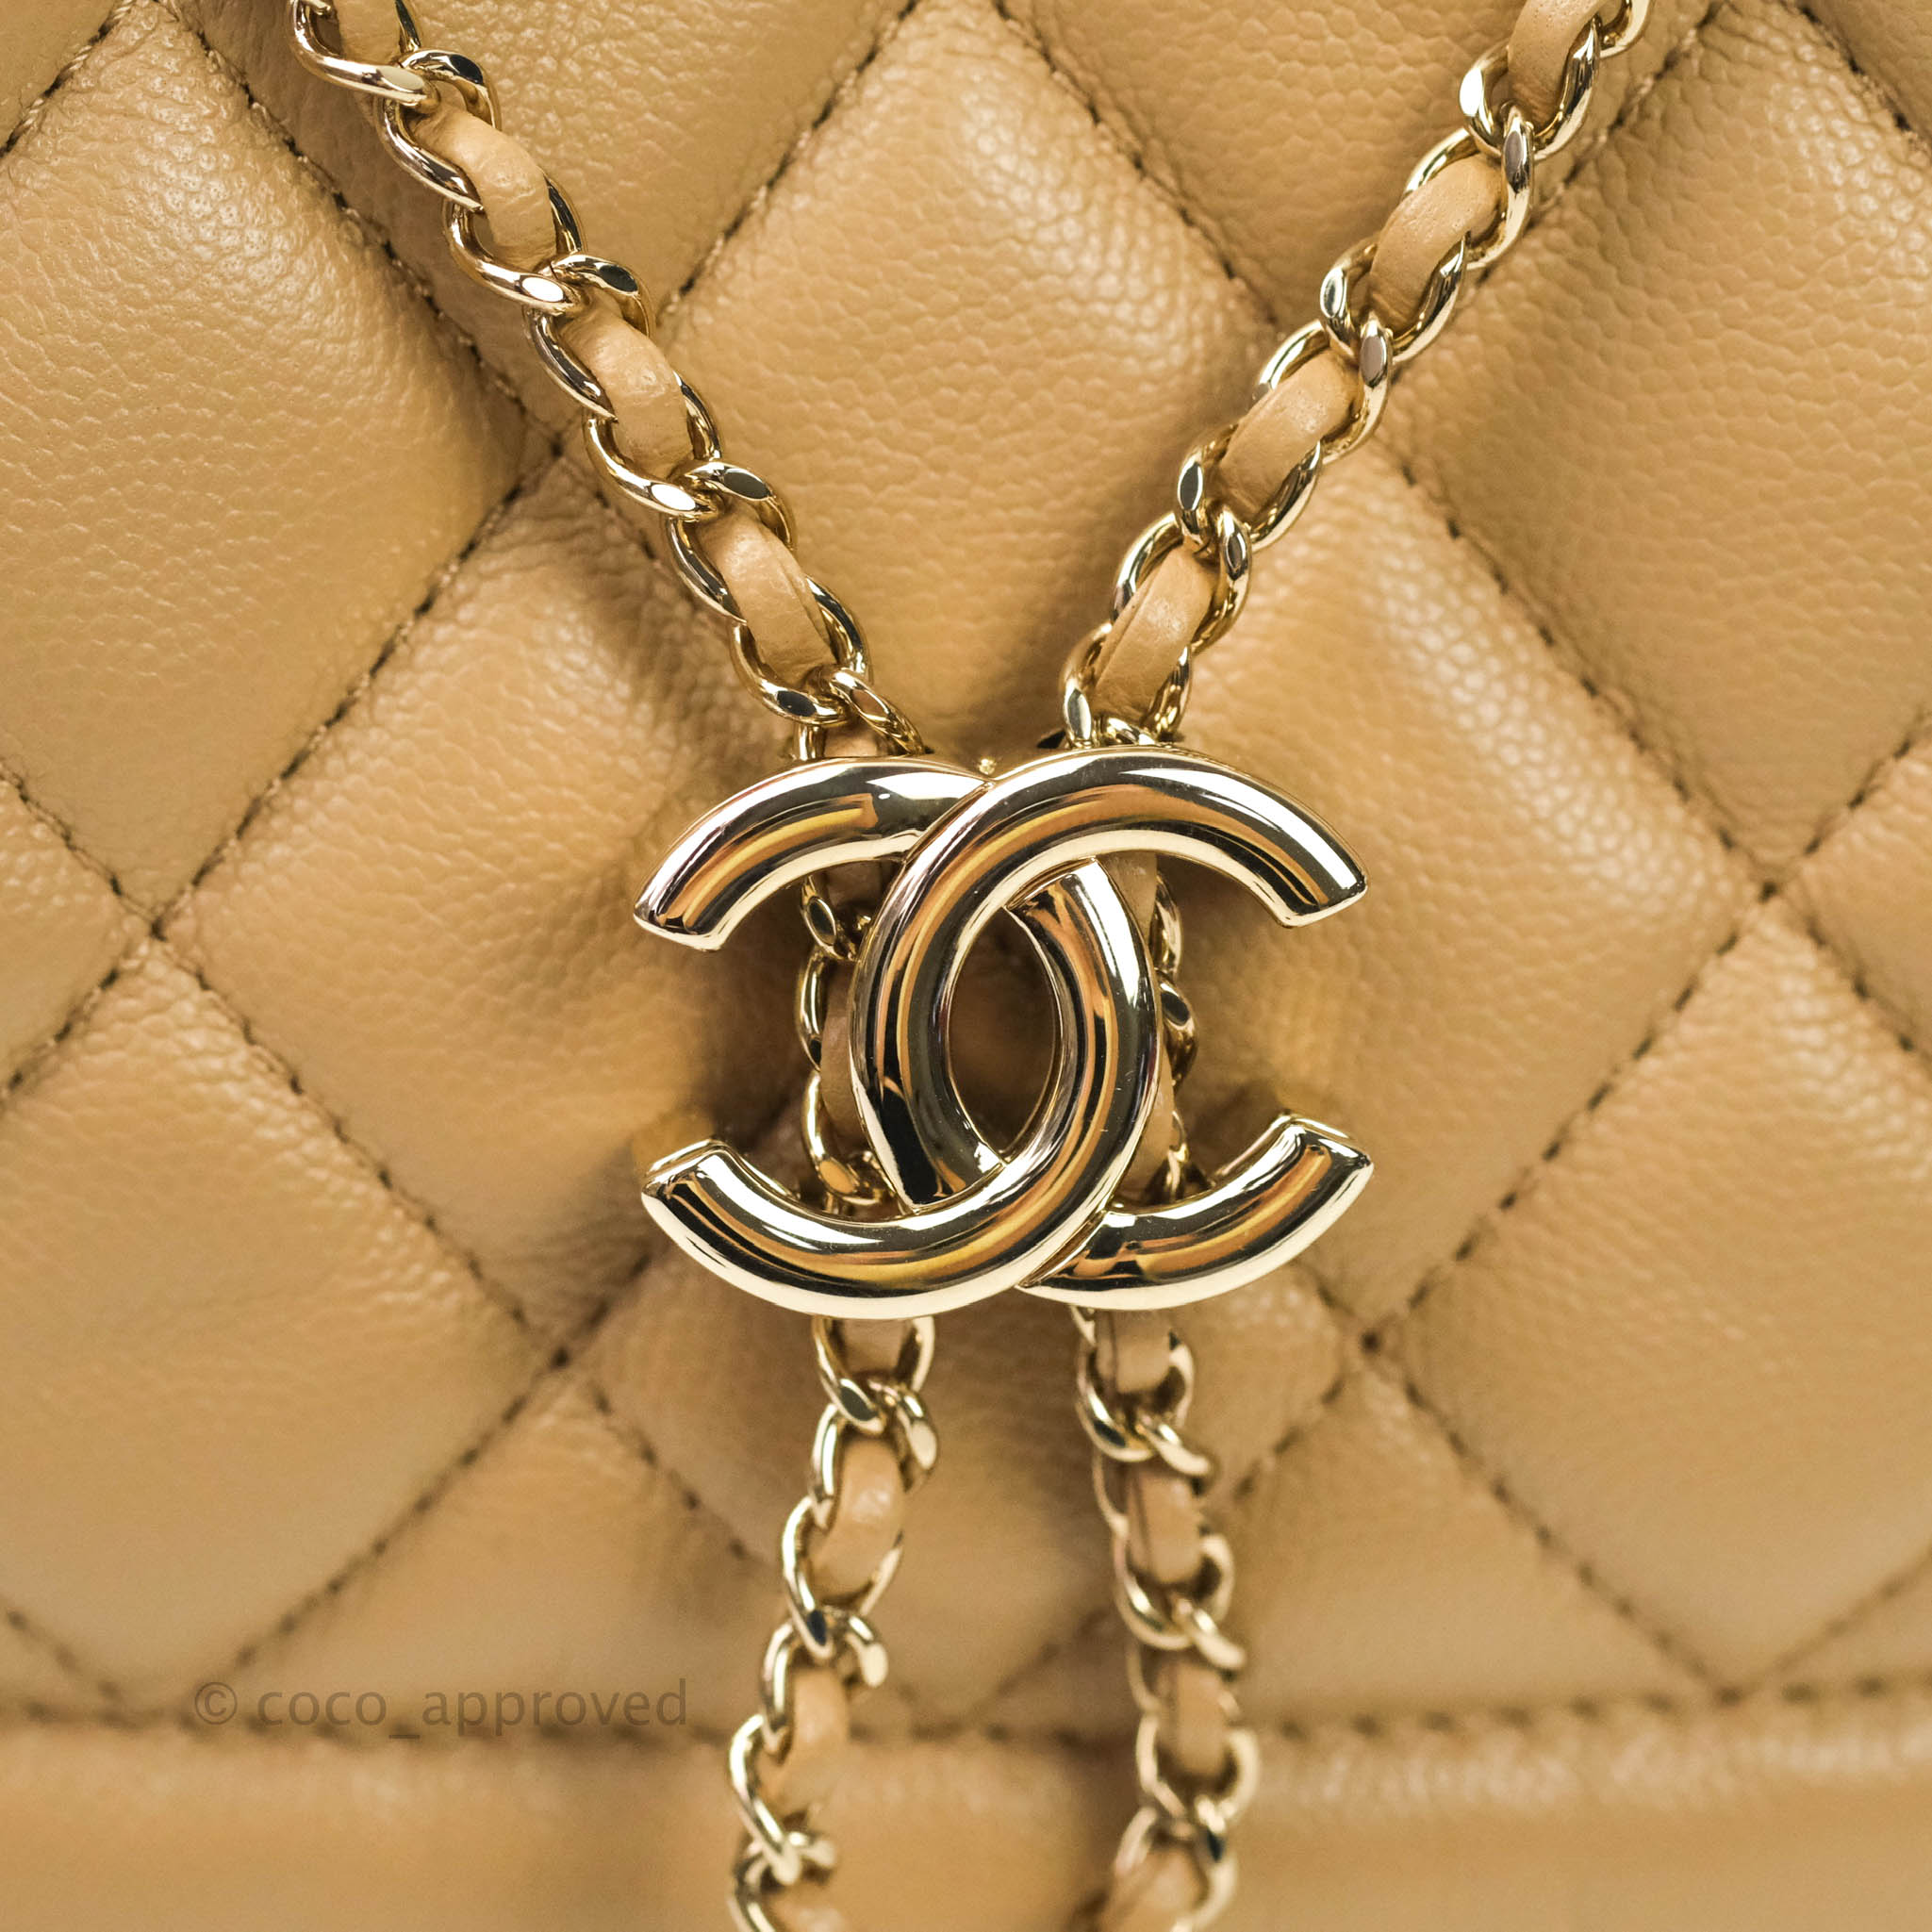 Chanel Caviar Quilted Rolled Up Bucket Drawstring Bag Beige Gold